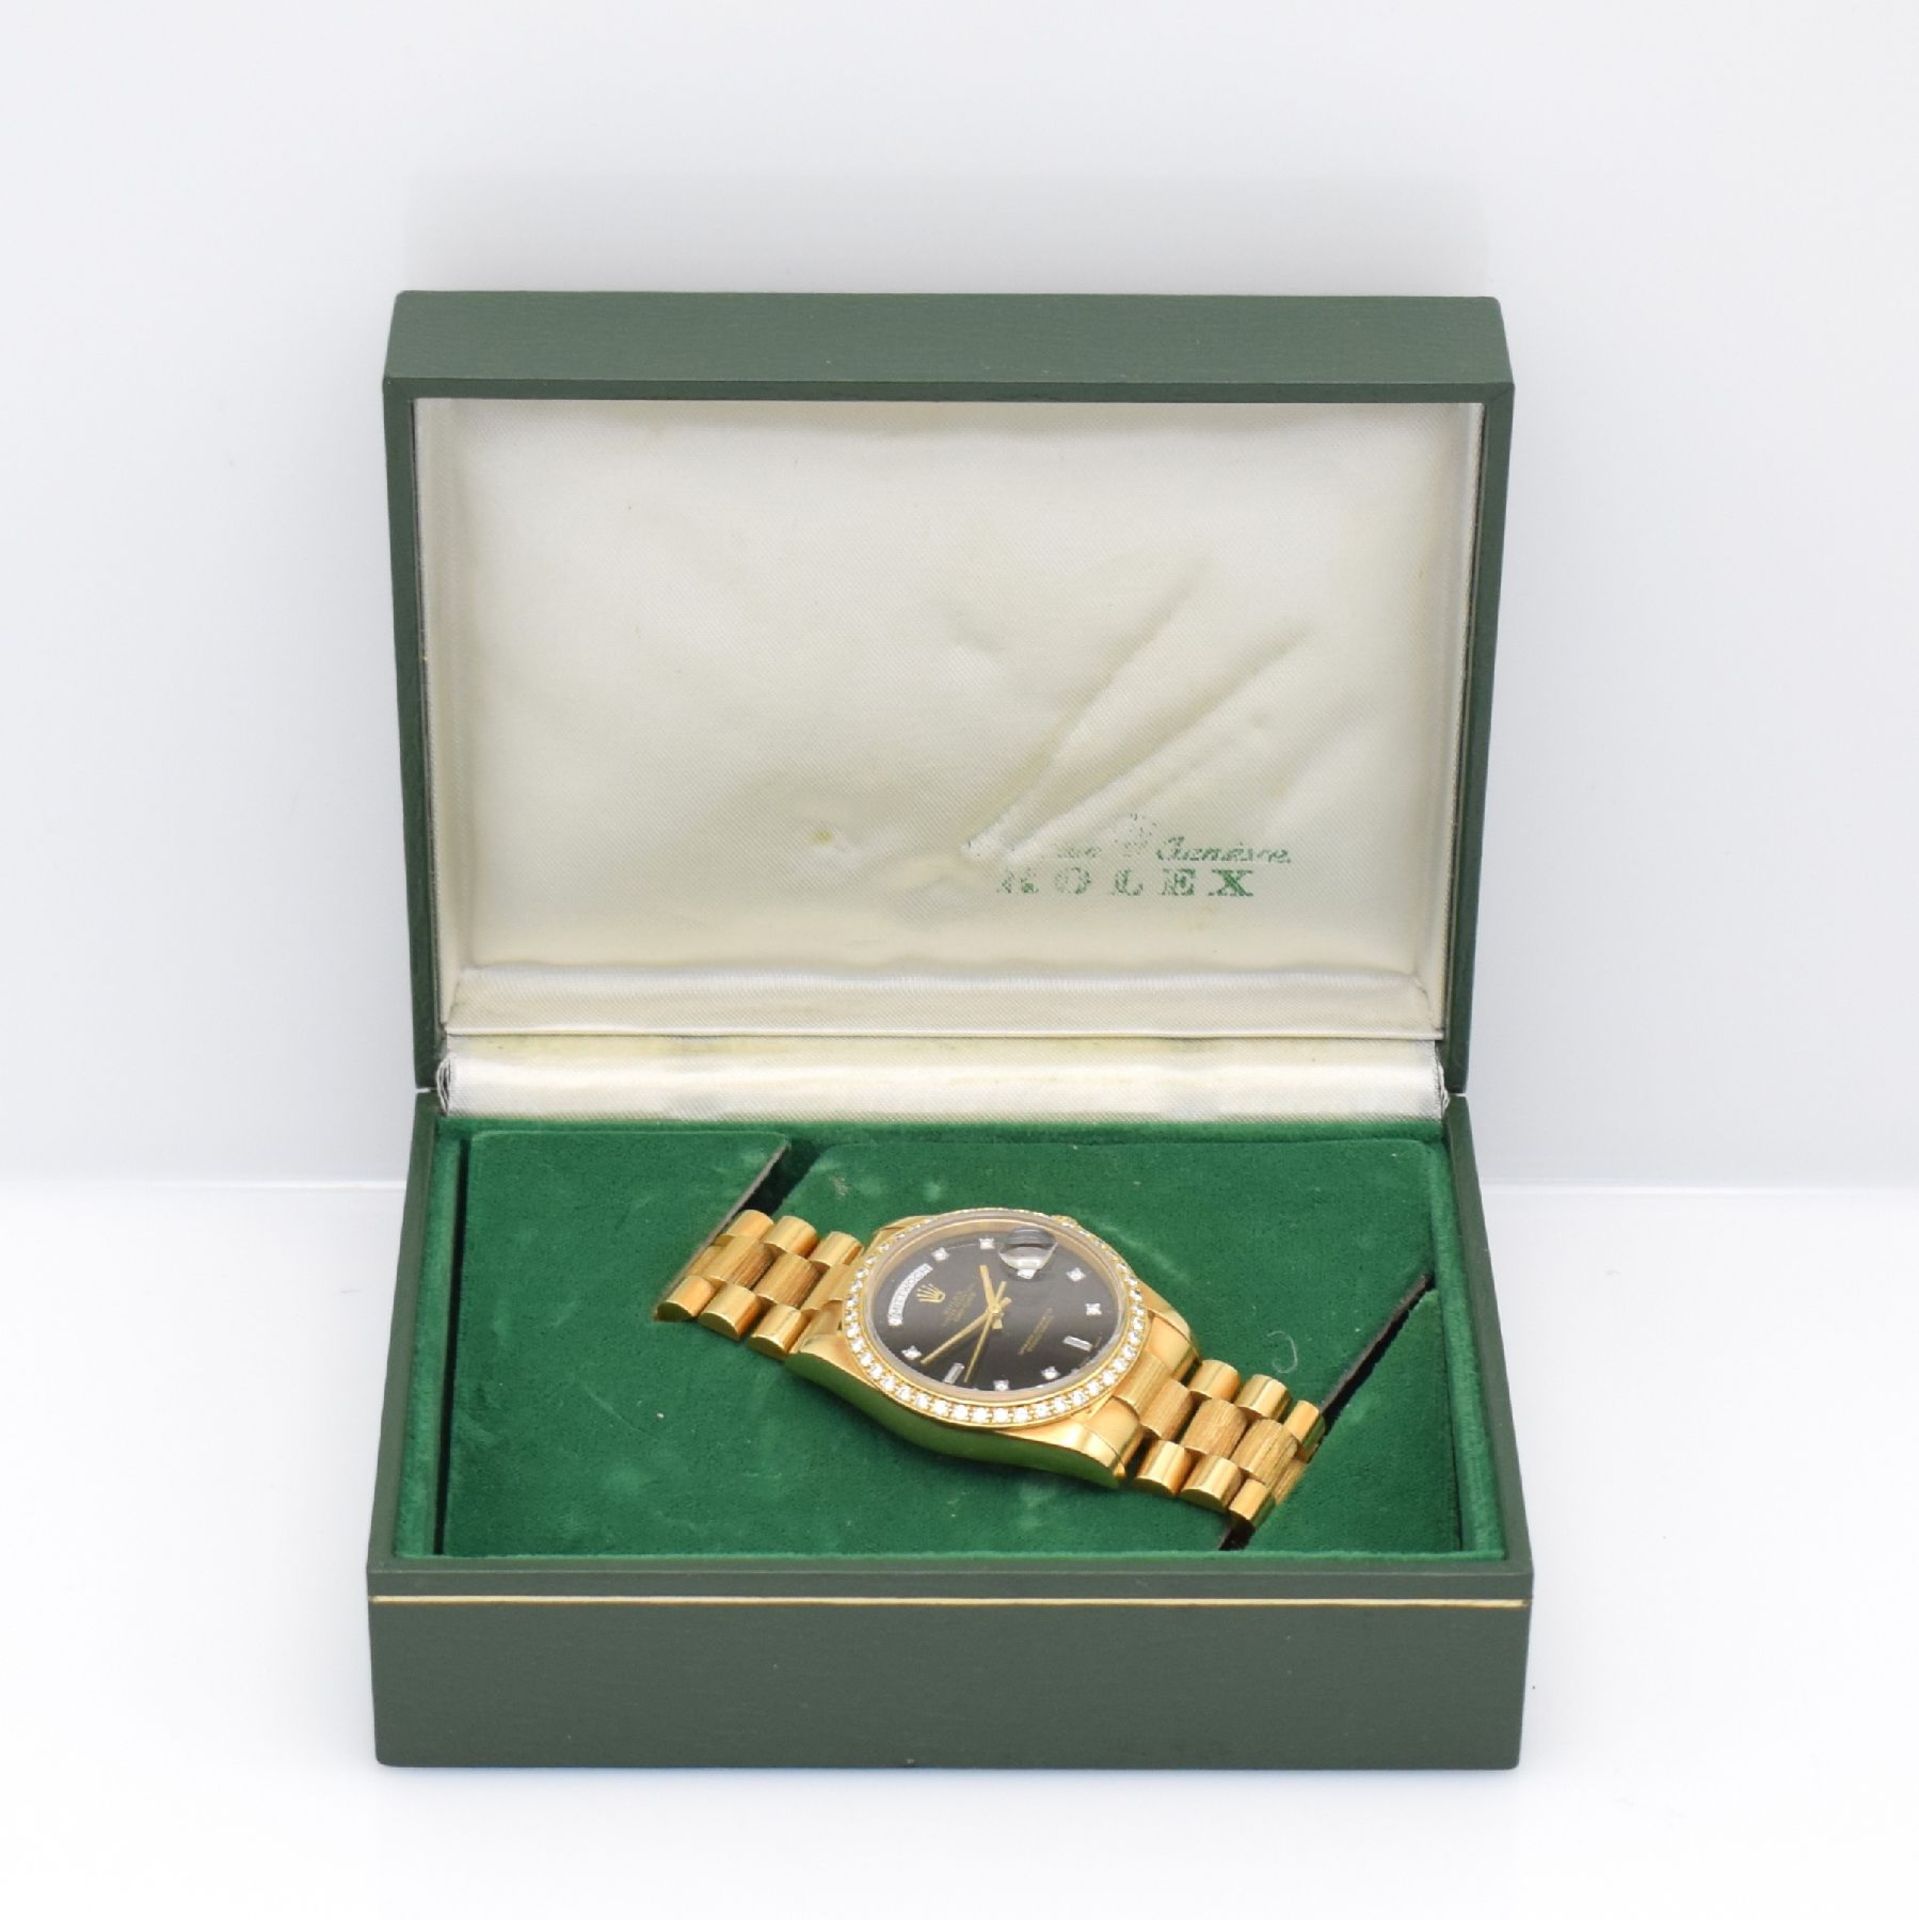 ROLEX Oyster Perpetual Day-Date Herrenarmbanduhr in GG - Image 10 of 10